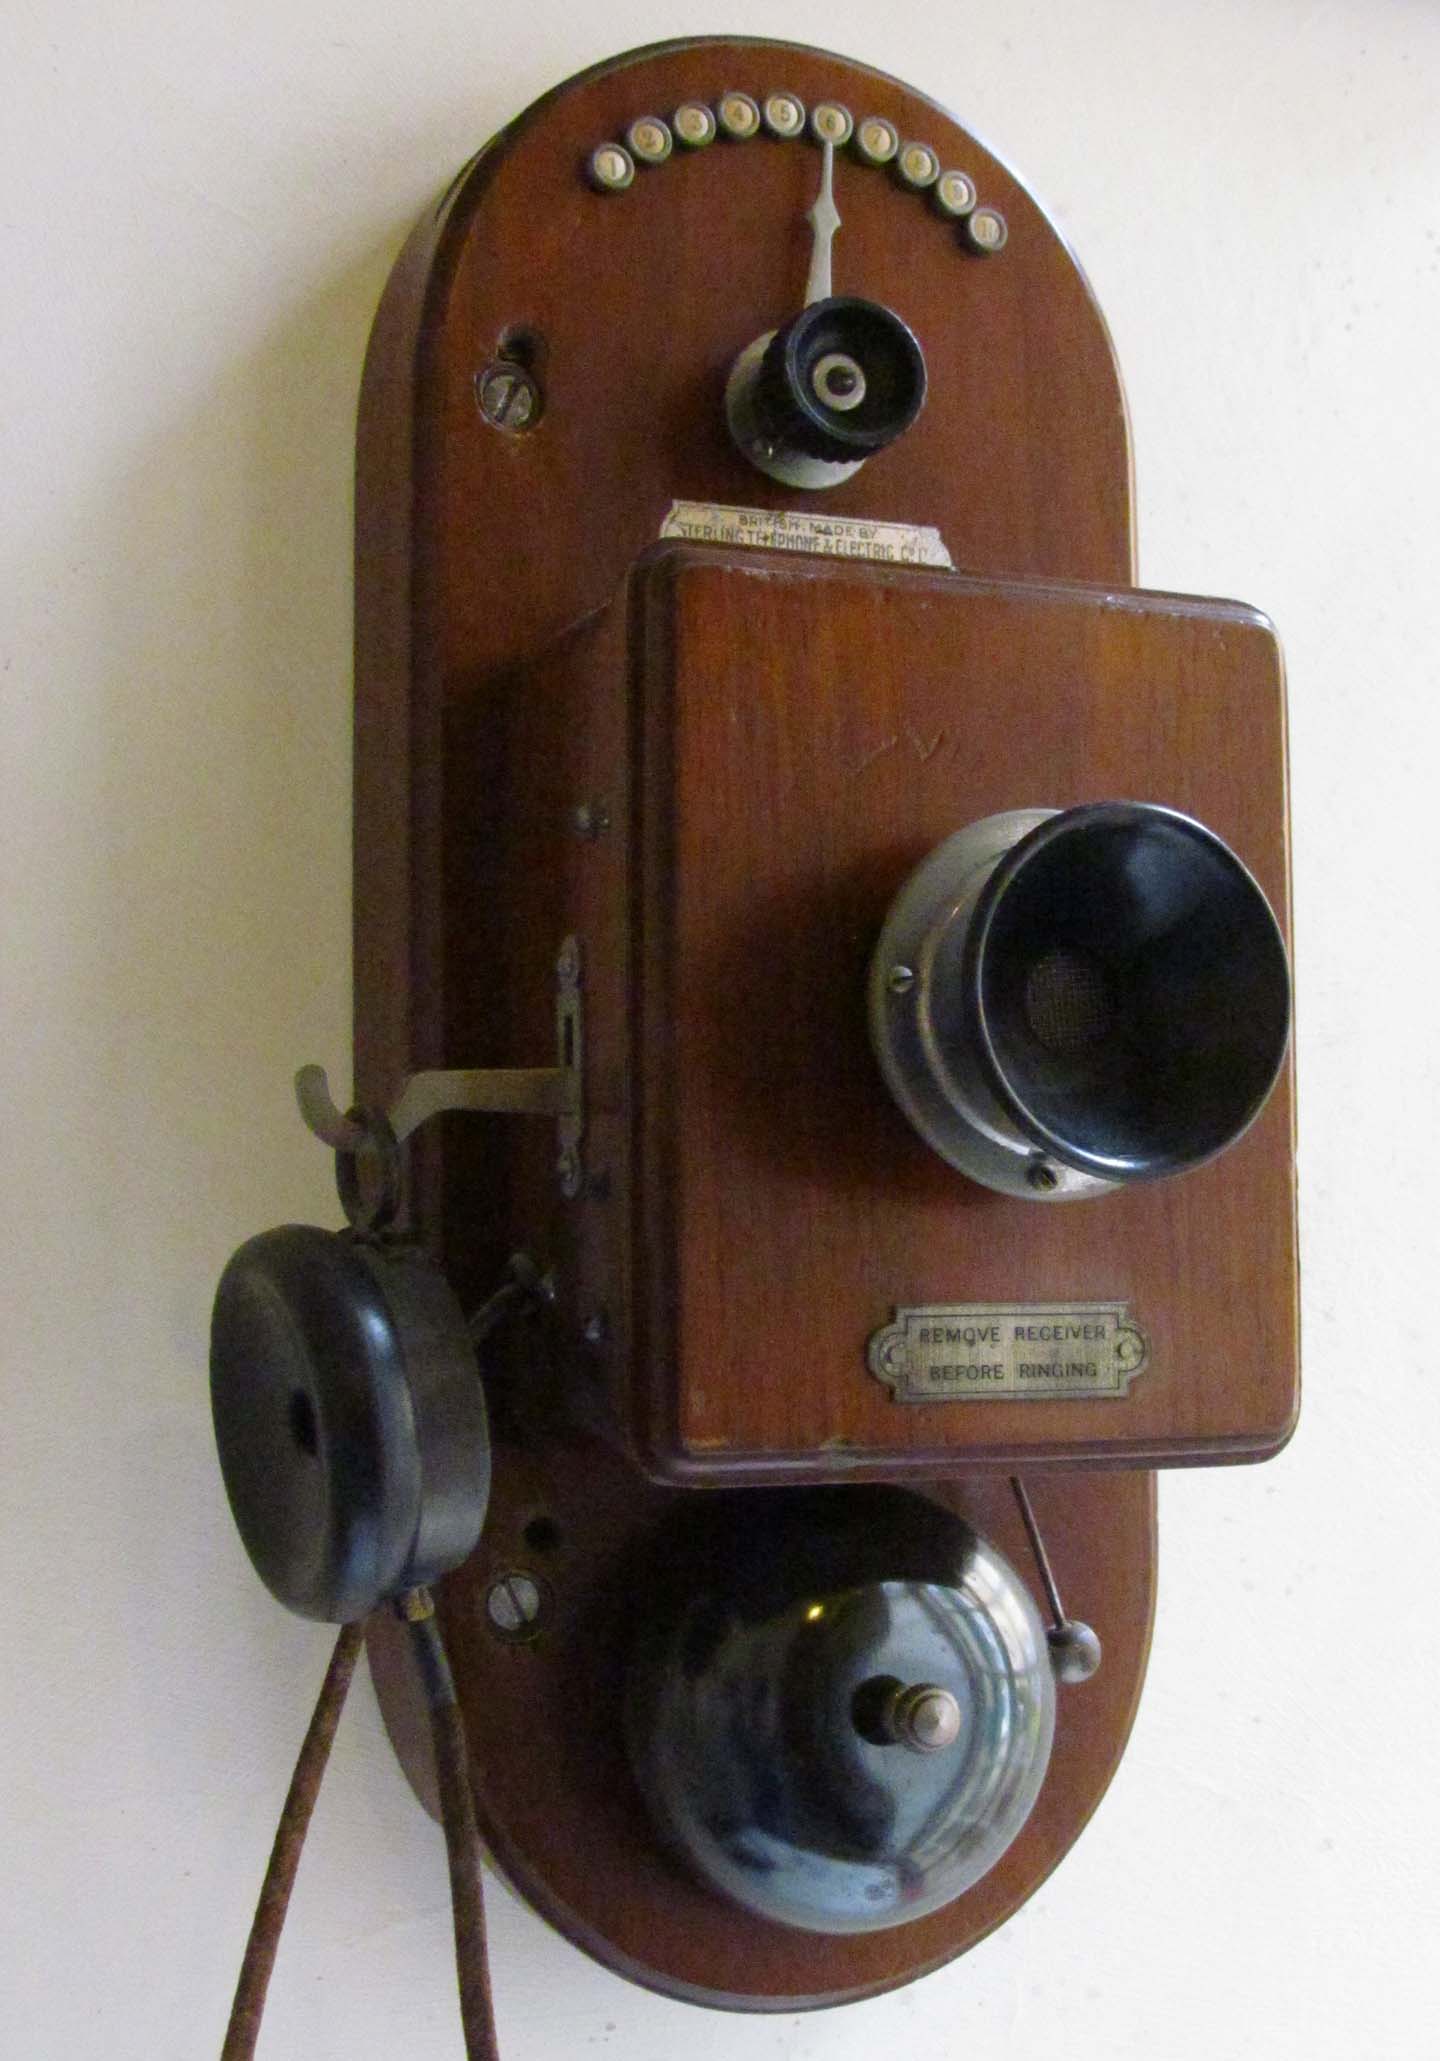 The Sterling Telephone in the service area